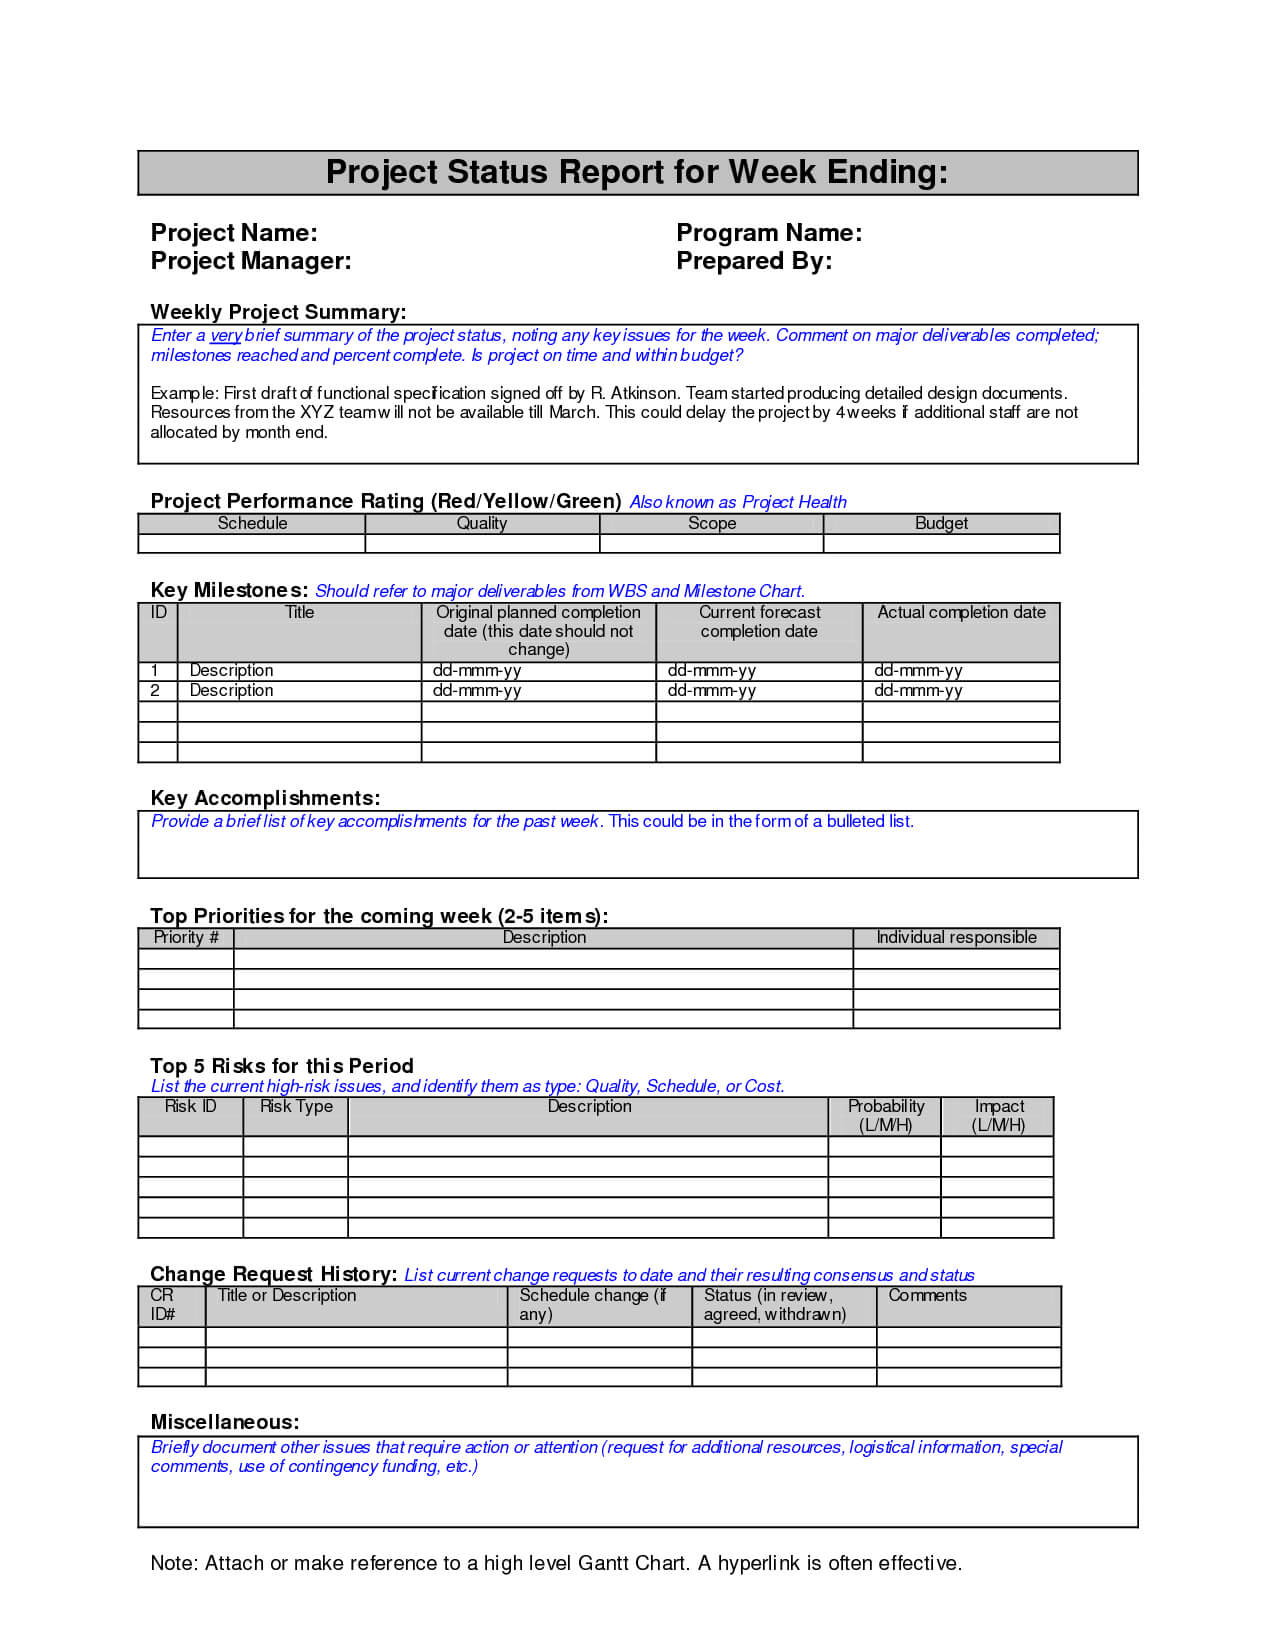 Weekly Project Atus Report Sample Google Search Work For Engineering Progress Report Template